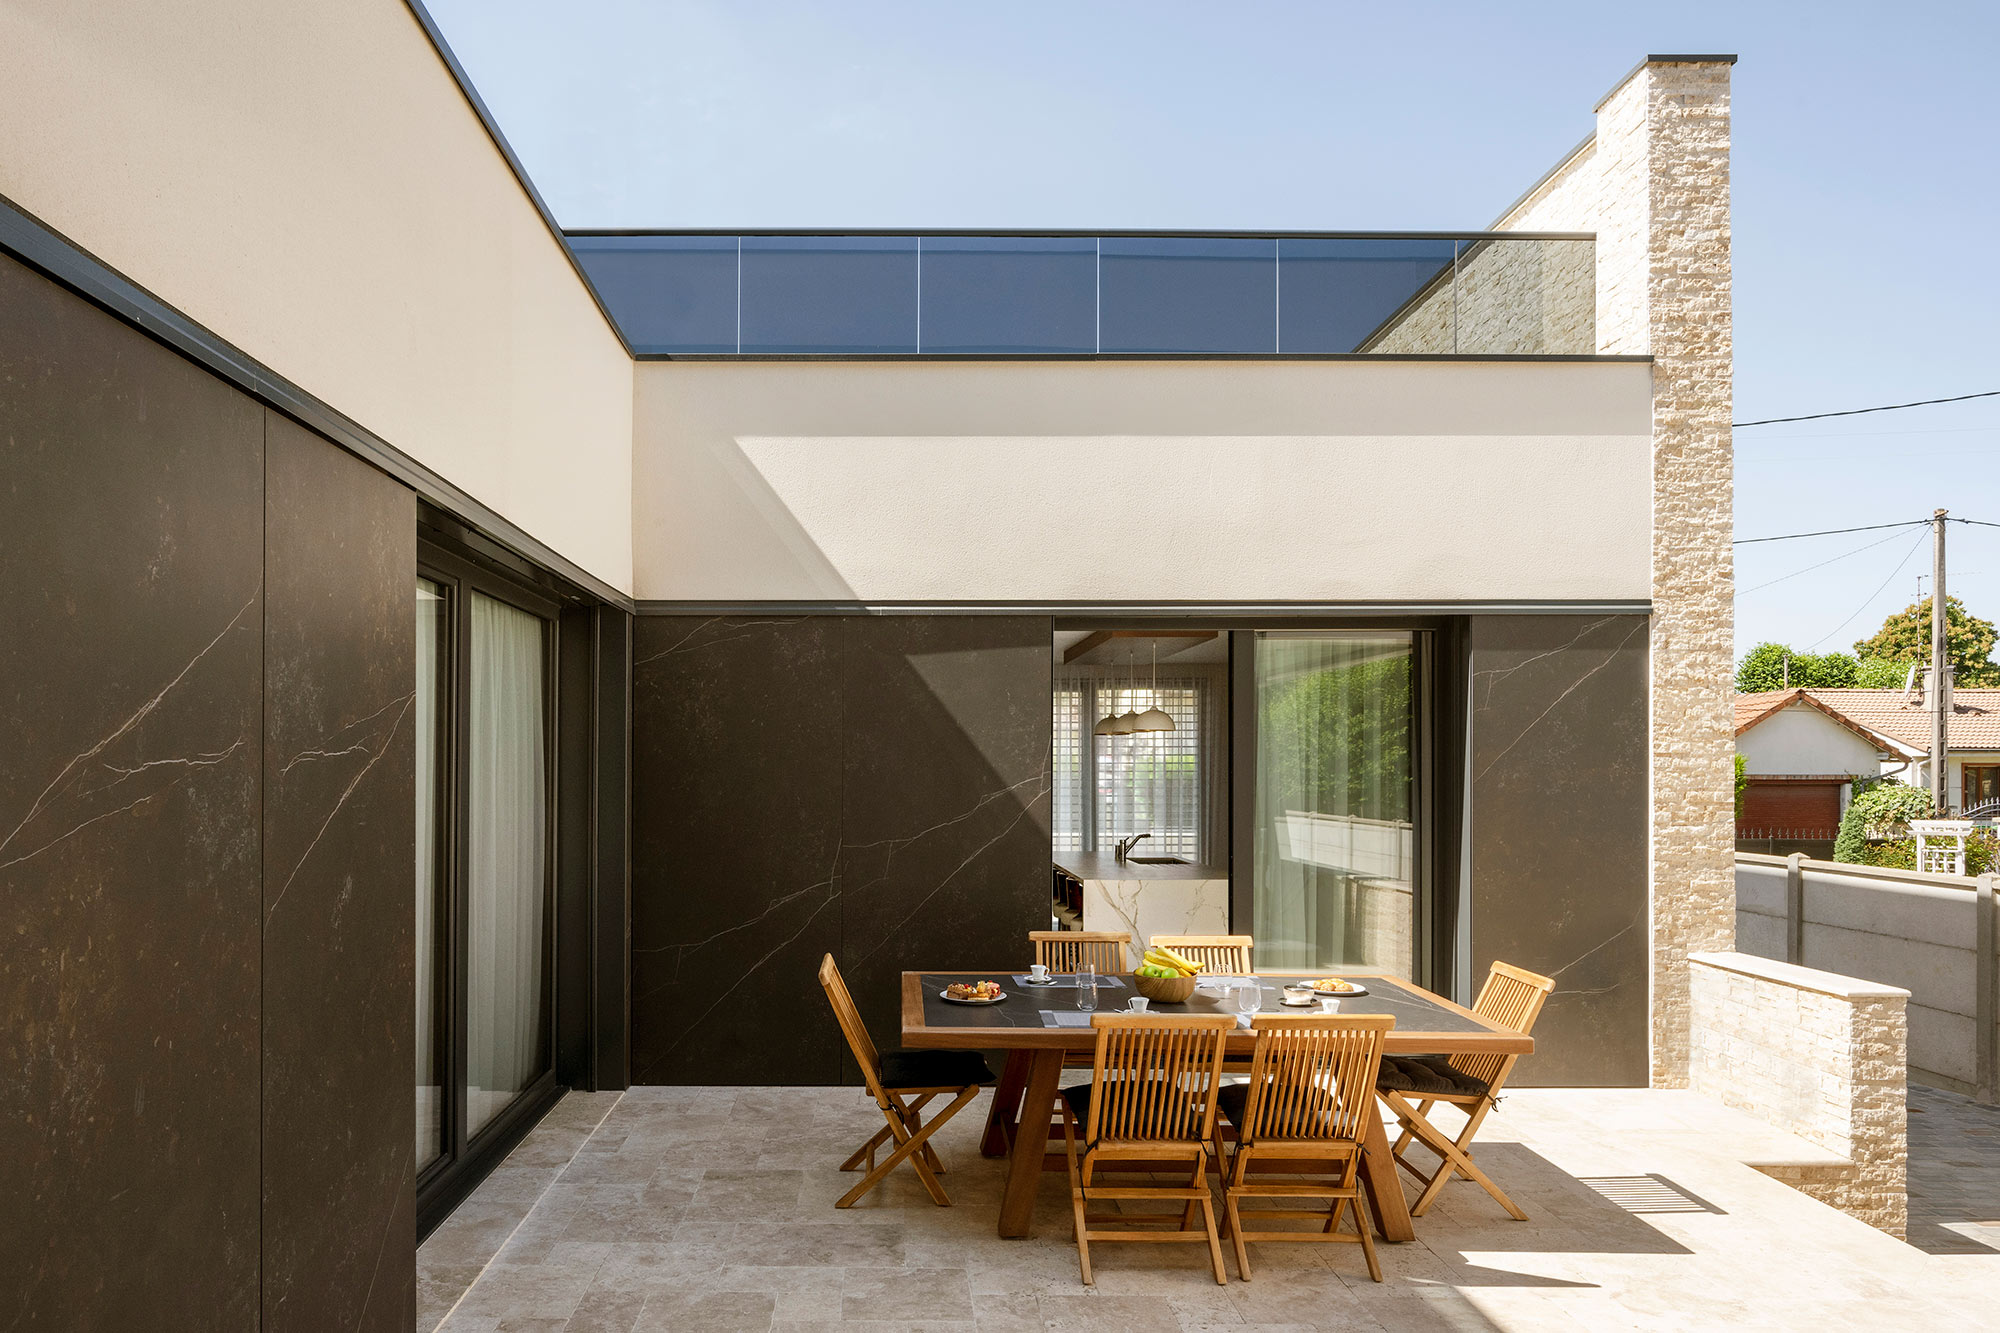 Image of Private House Fachada Dekton Francia 4 in Dekton for an integrated façade and outdoor kitchen in this private home in France - Cosentino